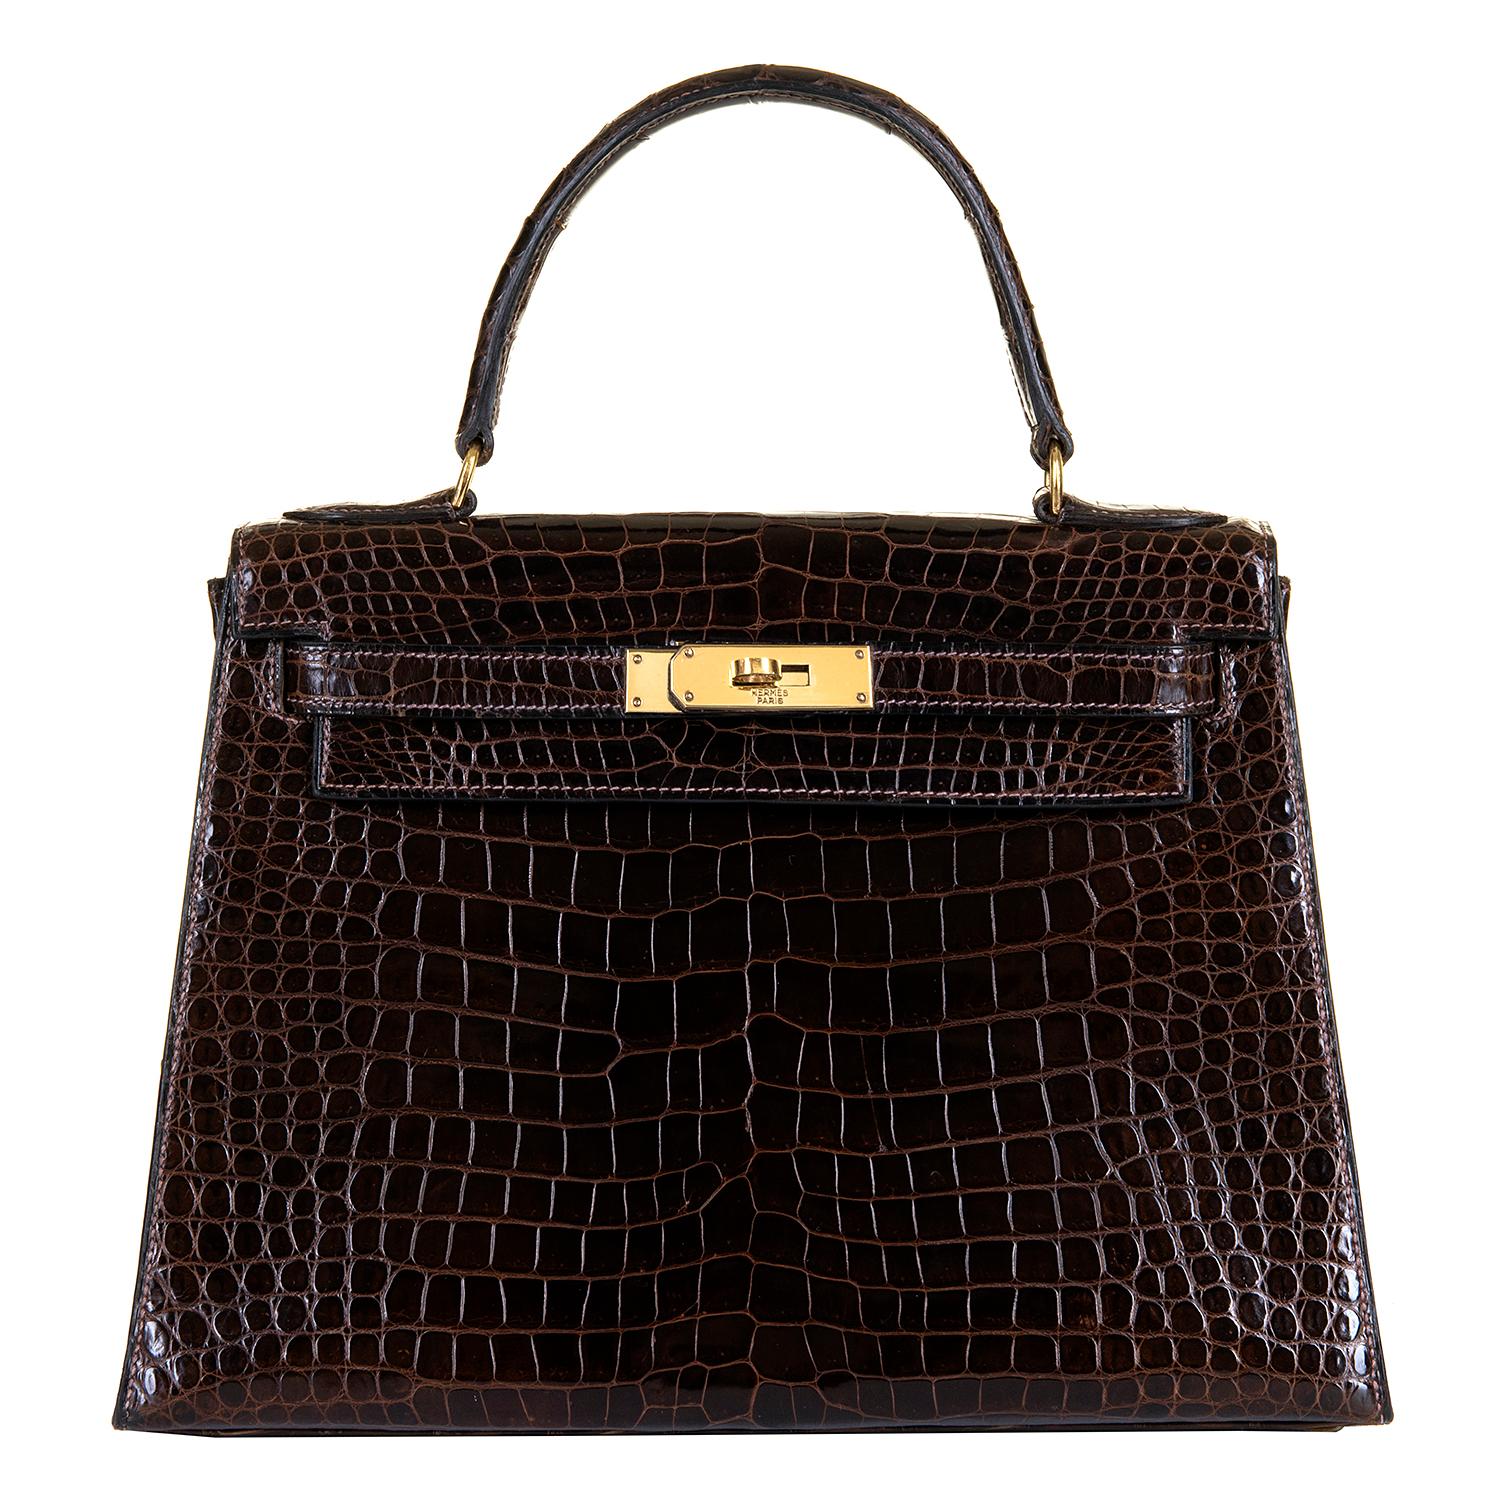 The optimum size, 28cm. This Hermes Vintage Chocolate Brown Porosus Crocodile Kelly Bag, is in excellent, pristine condition throughout, and is beautifully accented with Gold-plated hardware. This much loved bag, from a private collection in